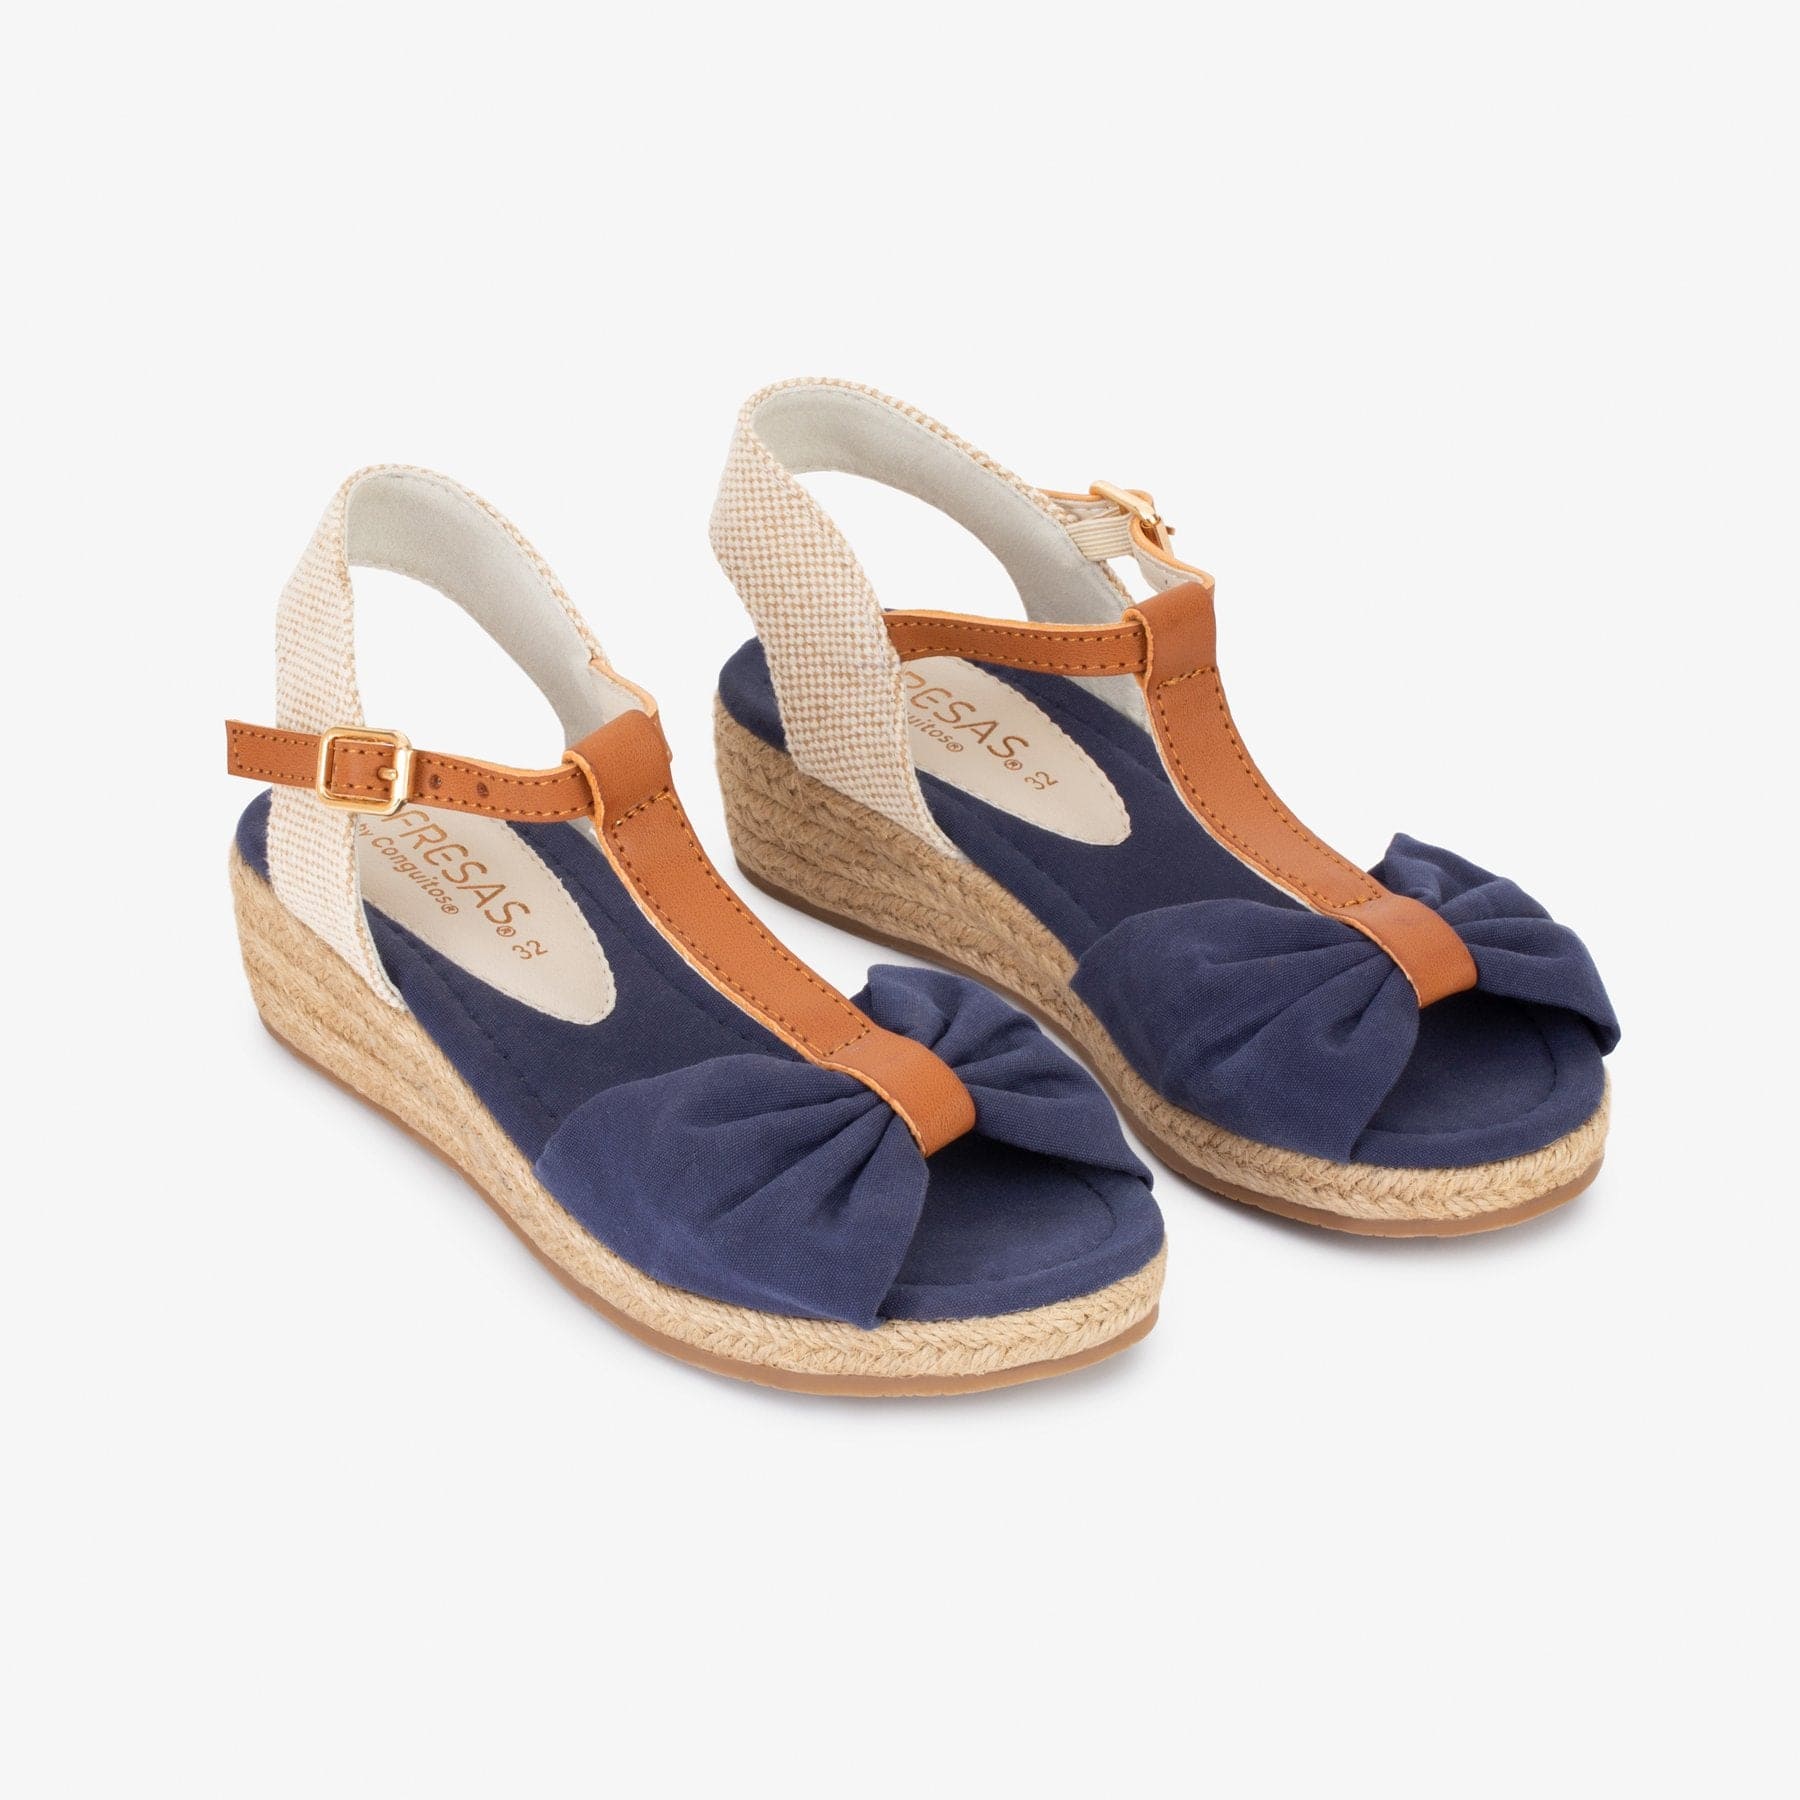 FRESAS CON NATA Shoes Girl's Navy Canvas Wedge Sandals